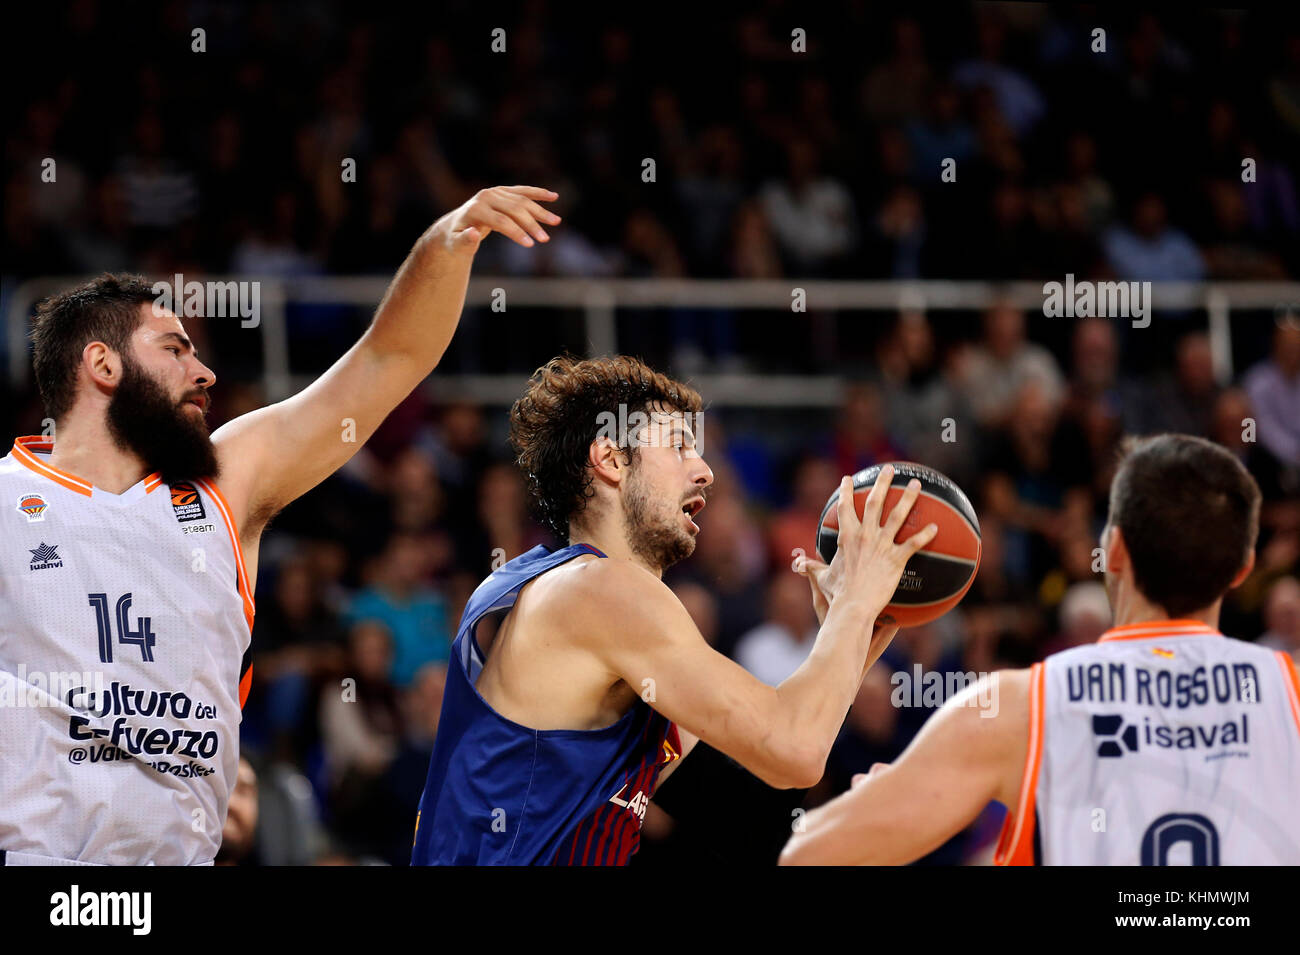 Bojan Dubljevic and Ante Tomic during the match between FC Barcelona v  Valencia Basket Club corresponding to the week 8 of the basketball  Euroleague, in Barcelona, on November 17, 2017. Credit: Gtres